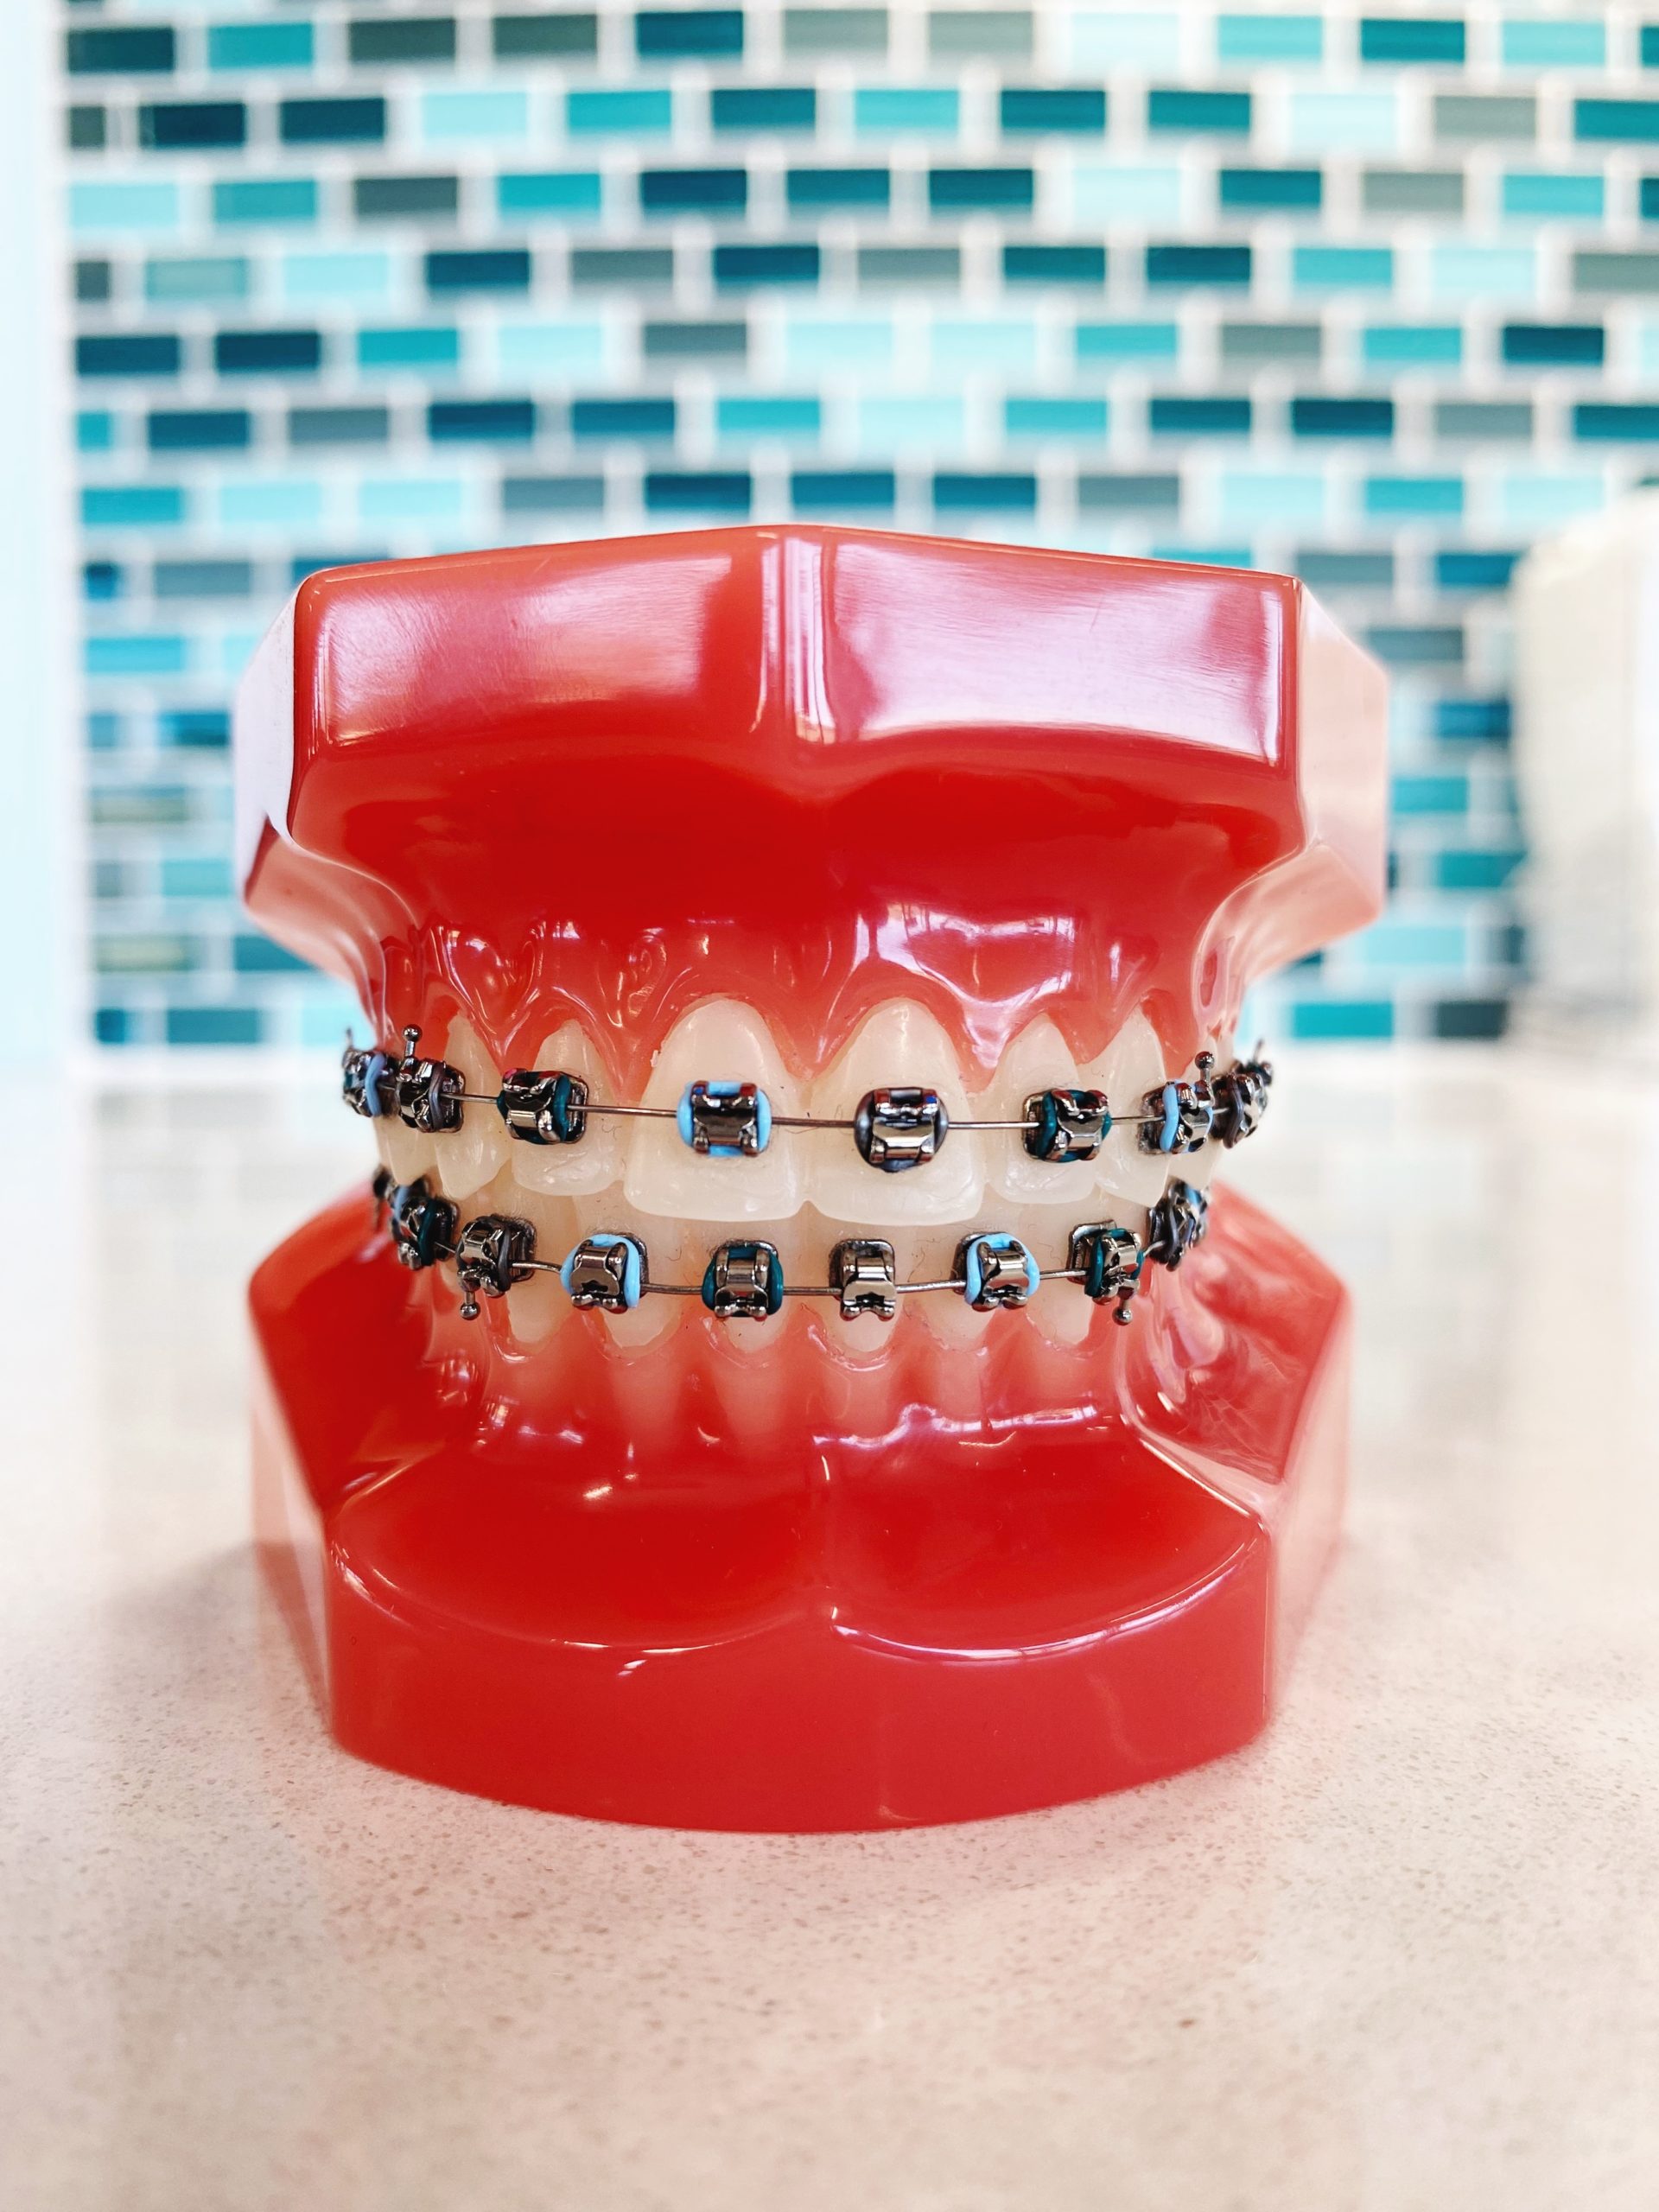 Braces Band Colors To Make Teeth Look Whiter